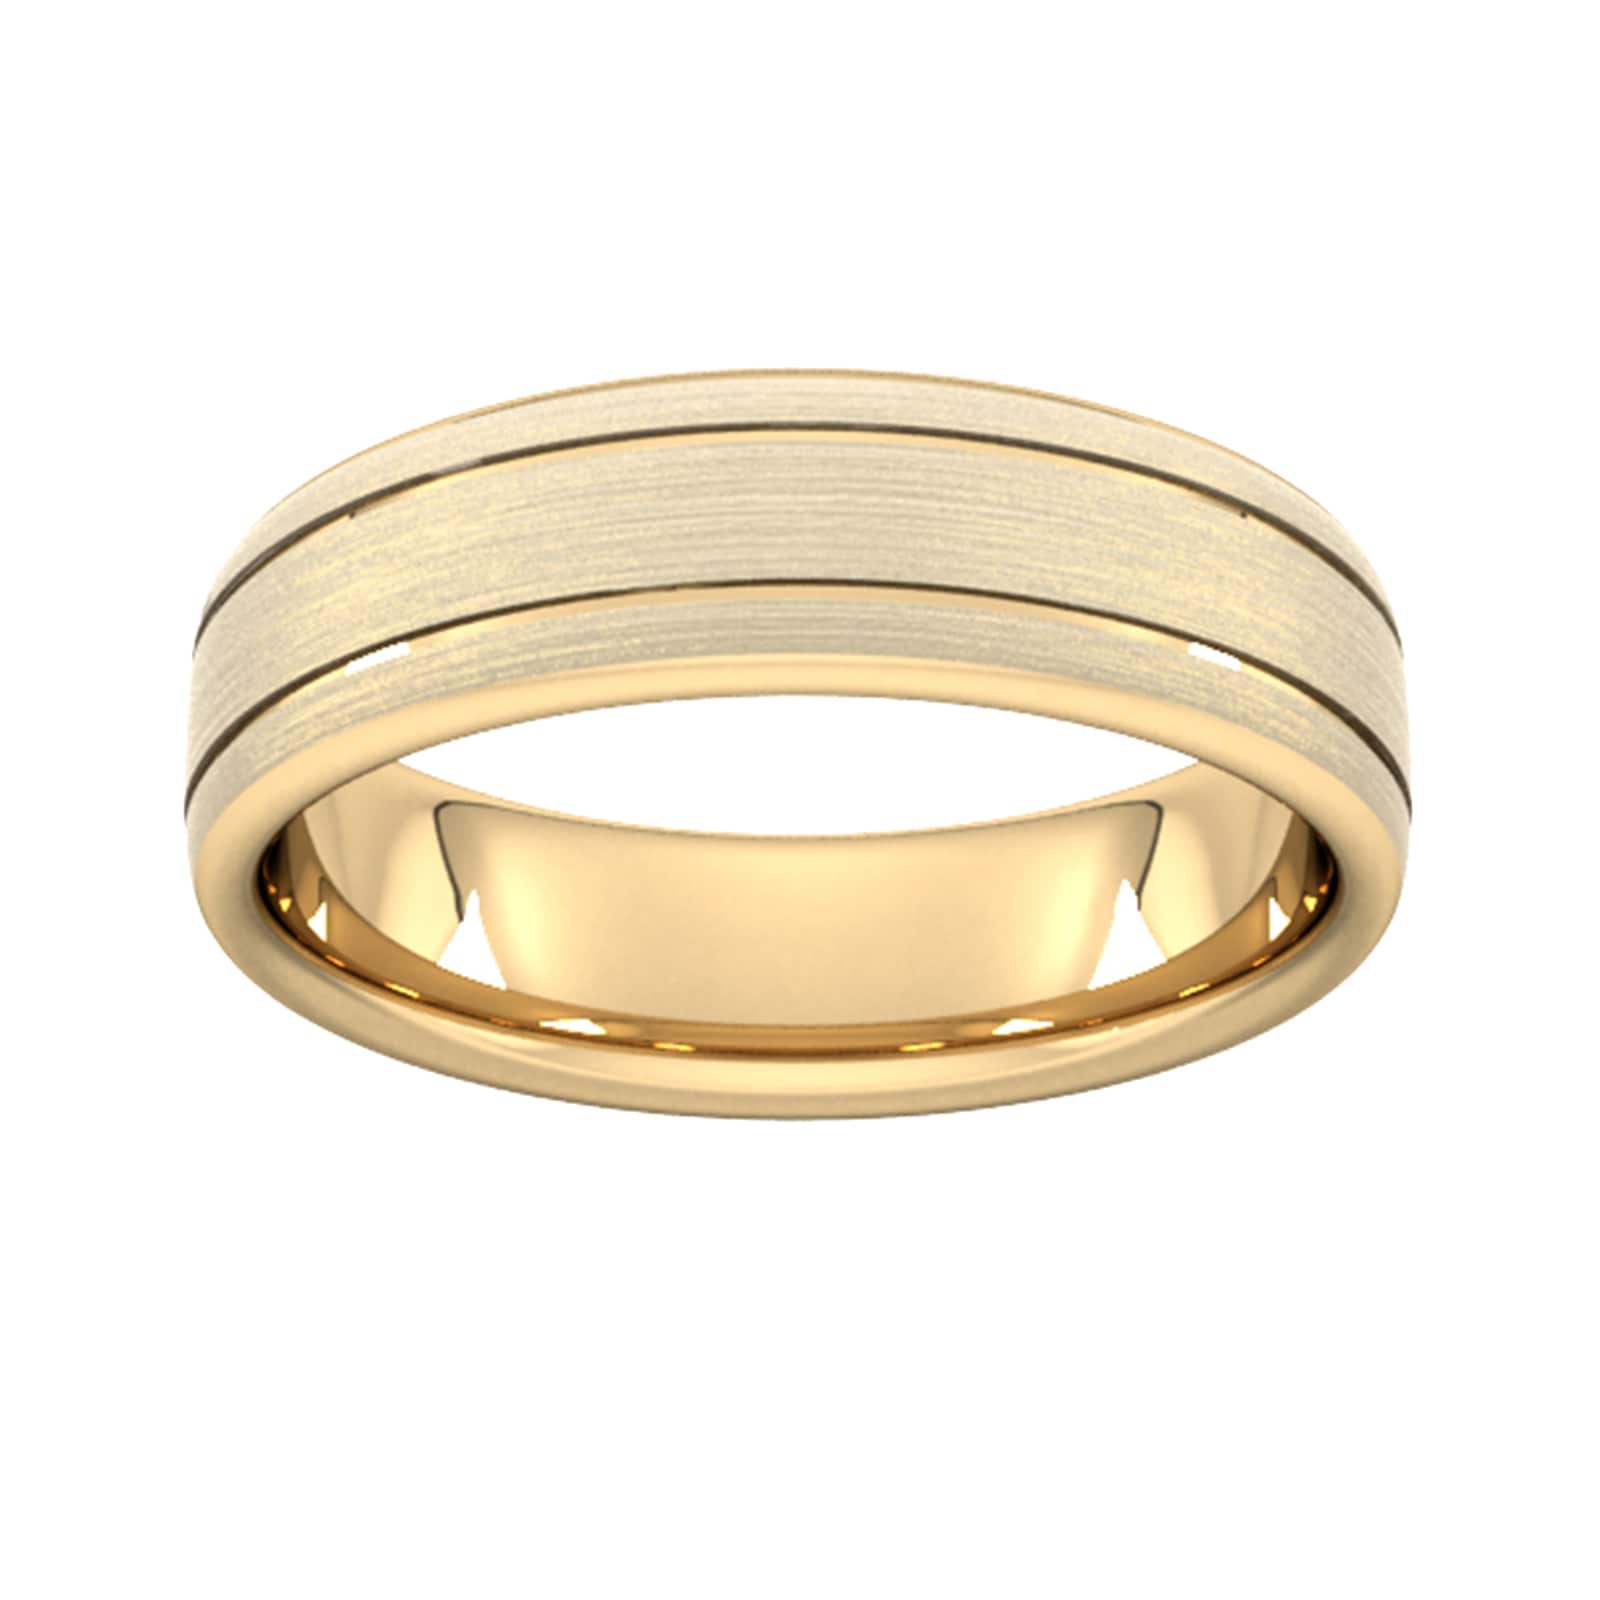 6mm Flat Court Heavy Matt Finish With Double Grooves Wedding Ring In 18 Carat Yellow Gold - Ring Size S